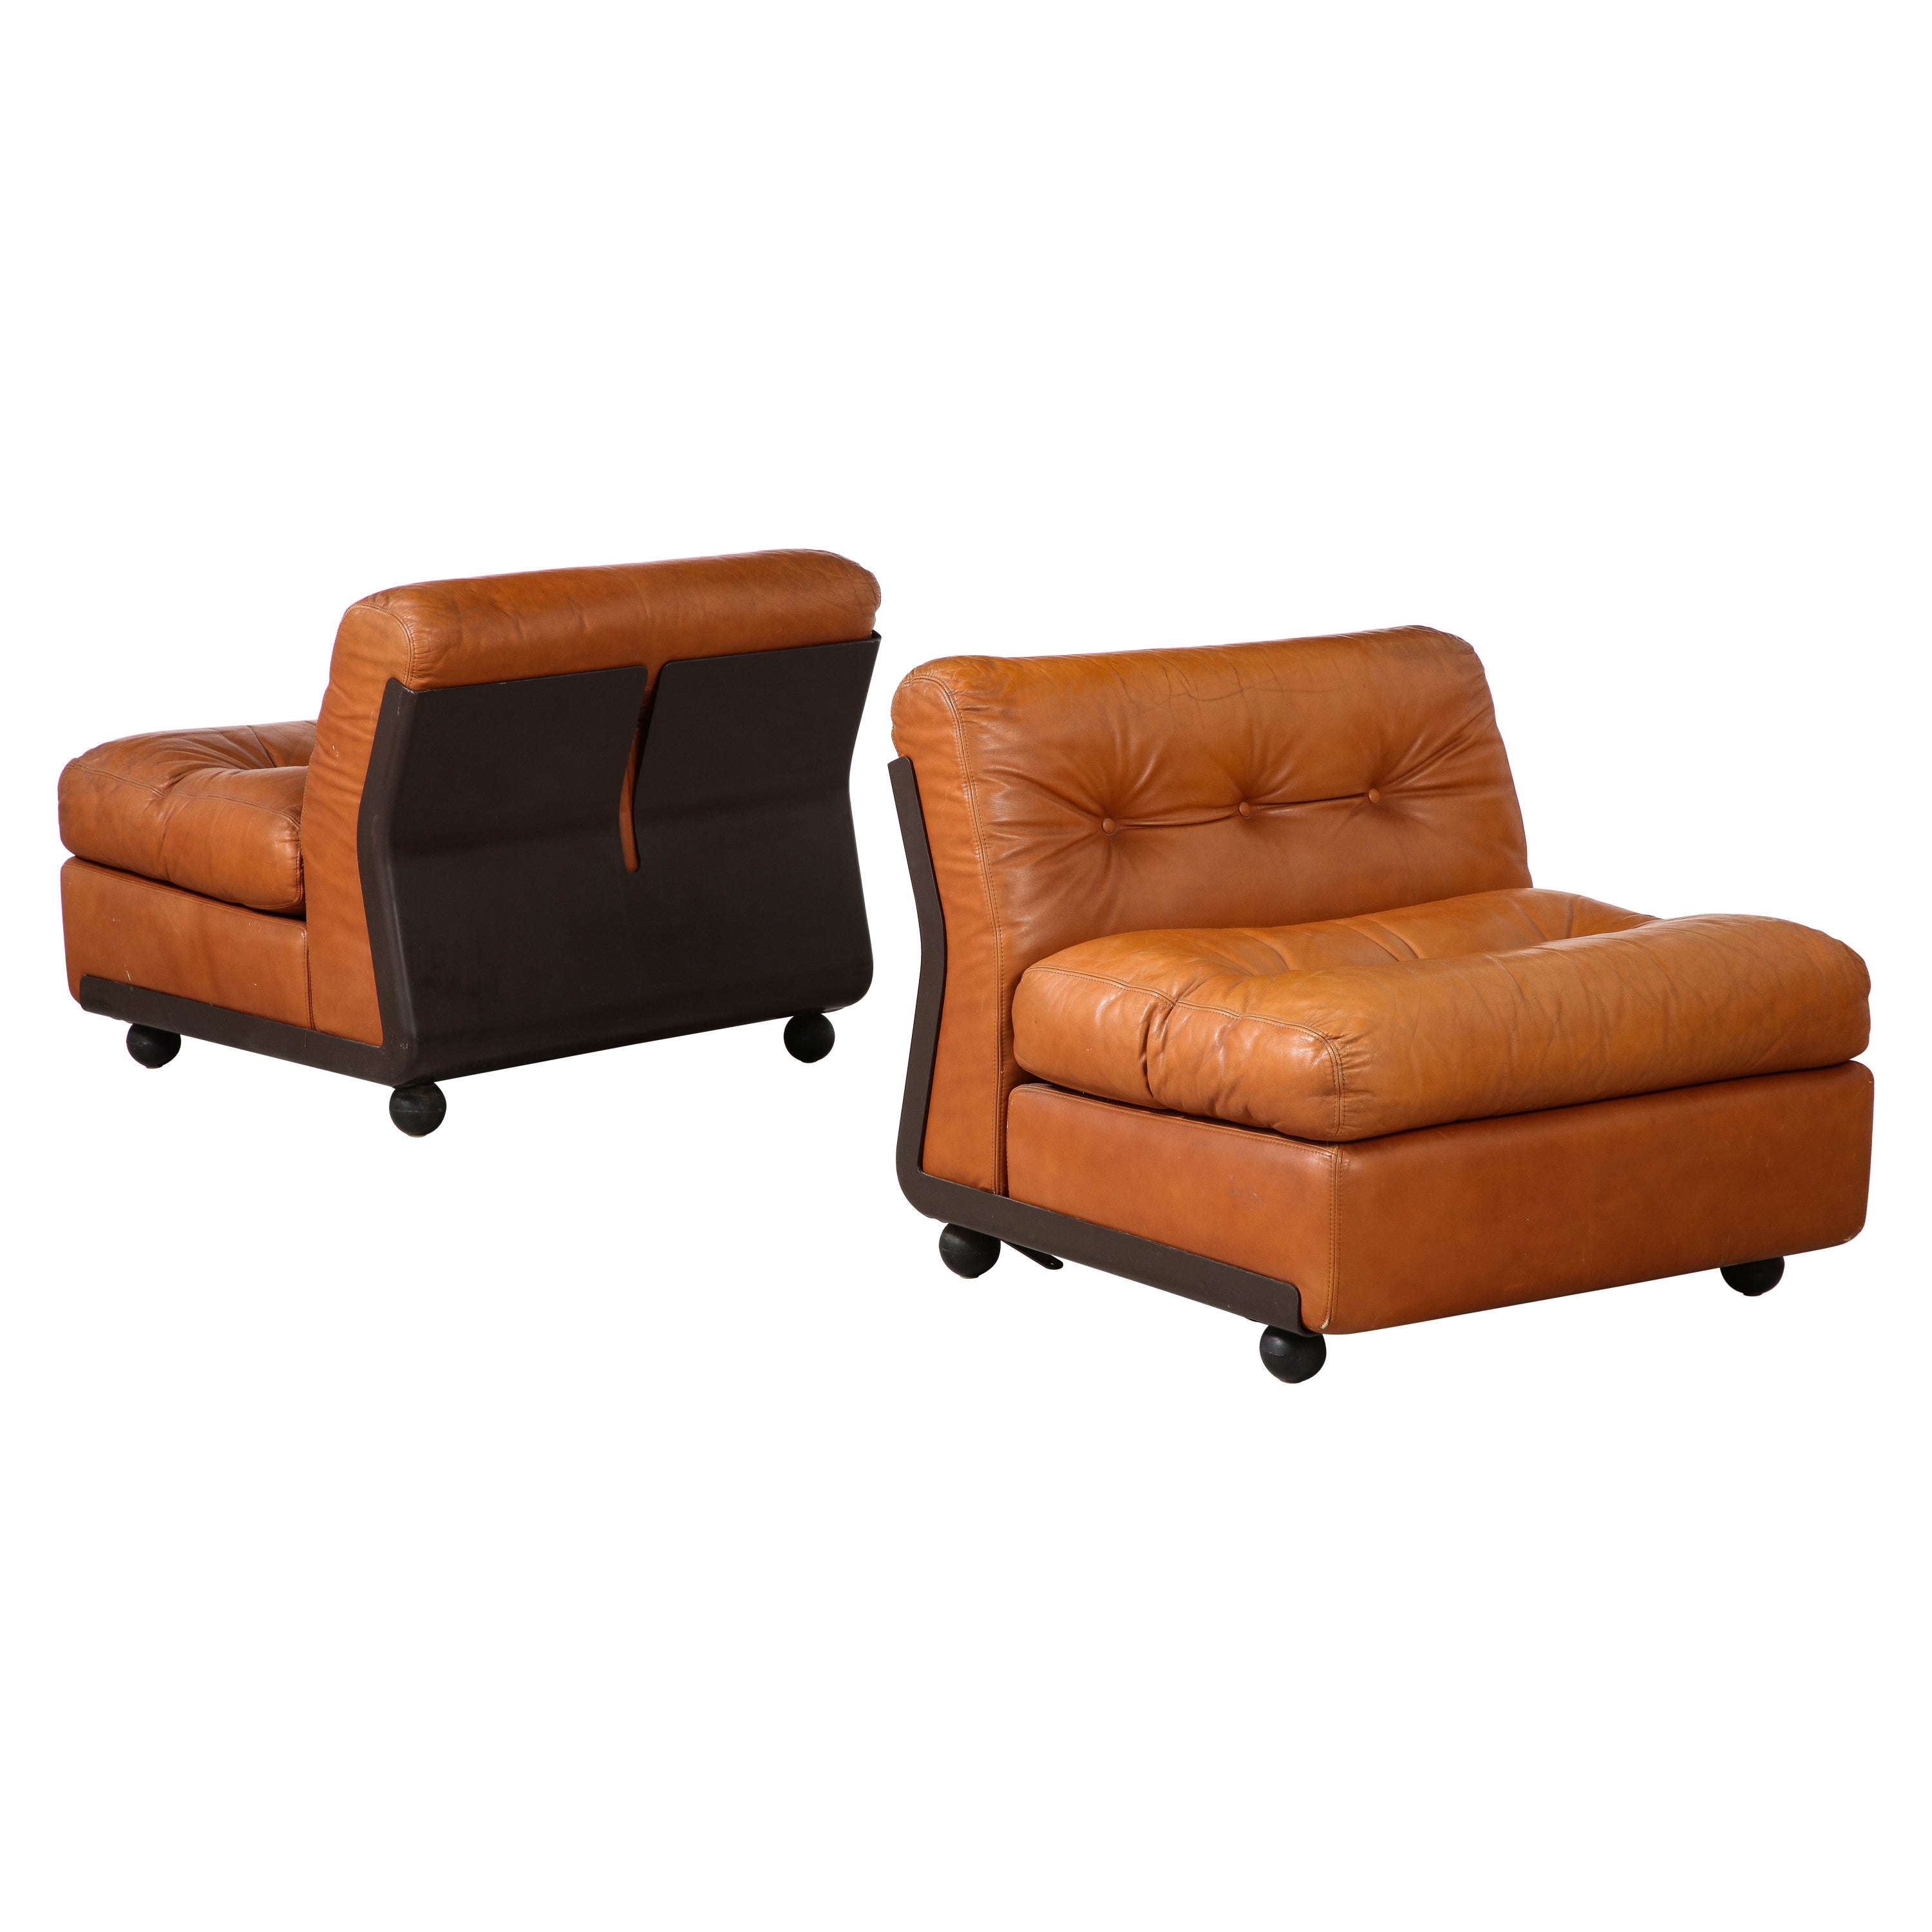 Pair of 'Amanta' Leather Lounge Chairs by Mario Bellini for B&B Italia For Sale